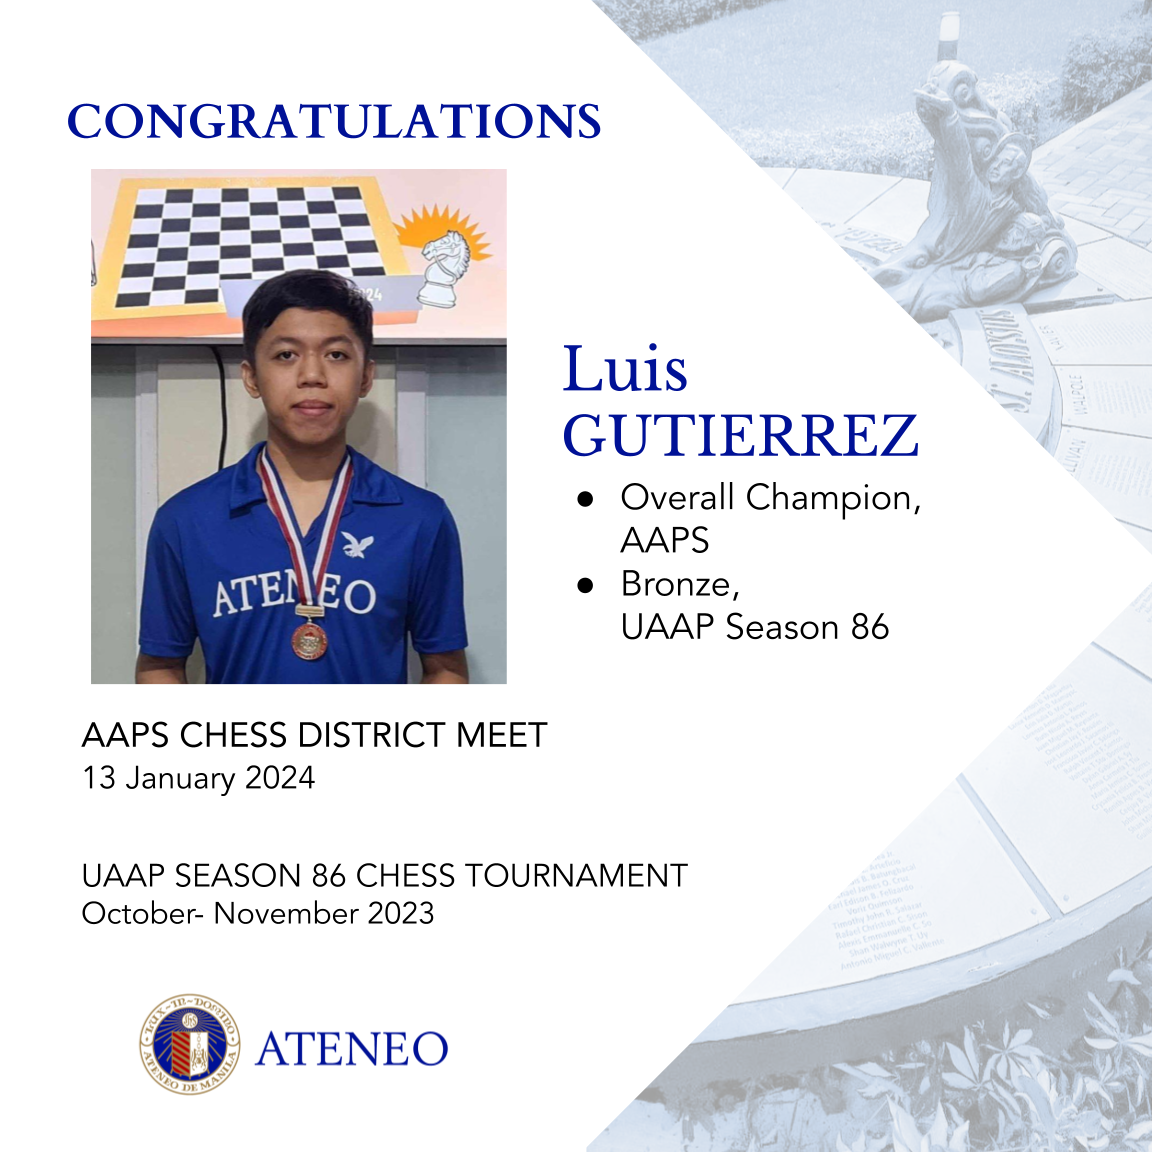 AAPS overall champion for chess Luis Gutierrez 